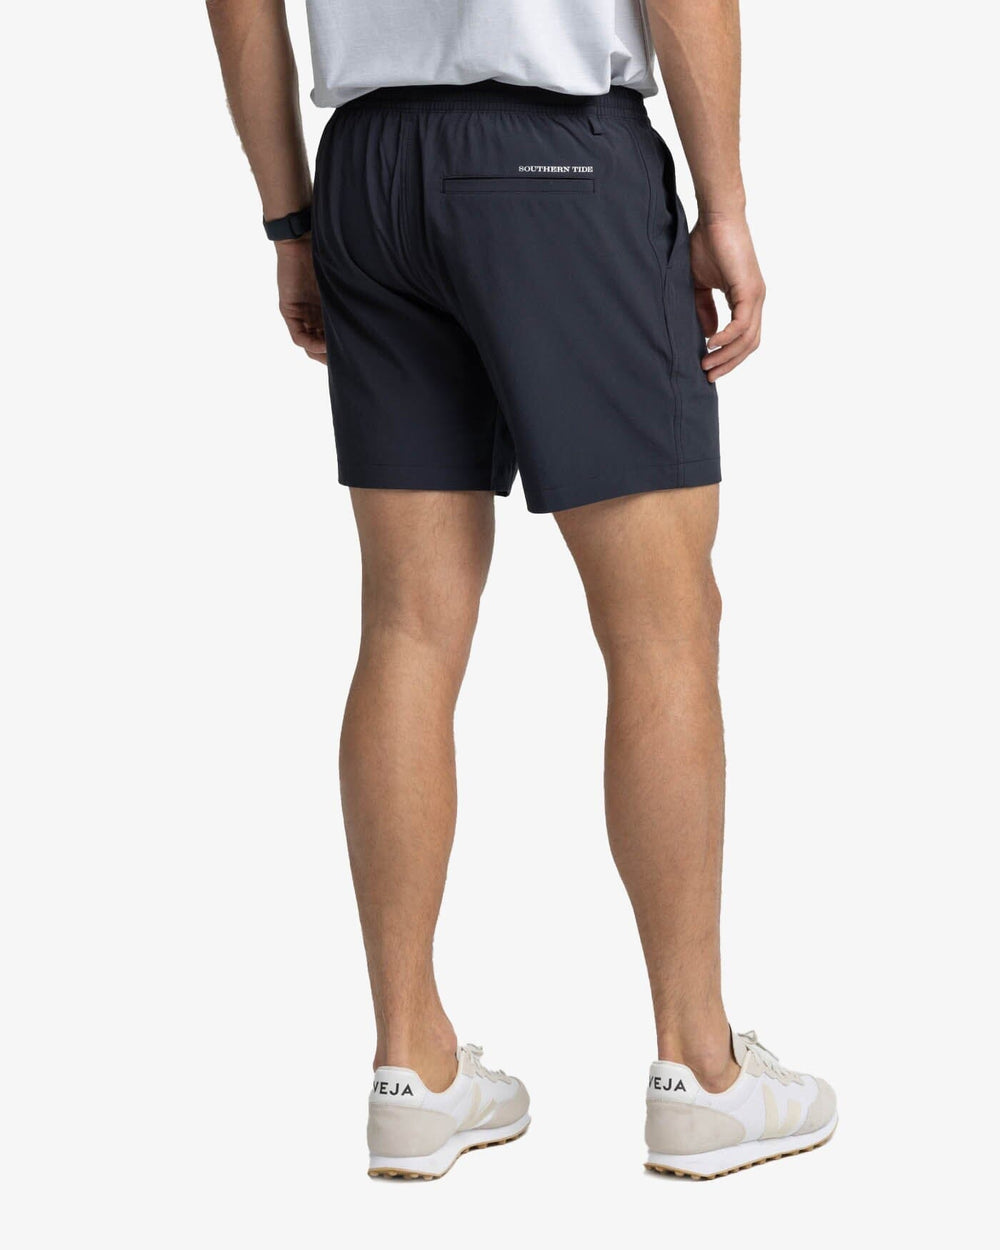 The back view of the Southern Tide Rip Channel 6 Inch Performance Short by Southern Tide - Caviar Black